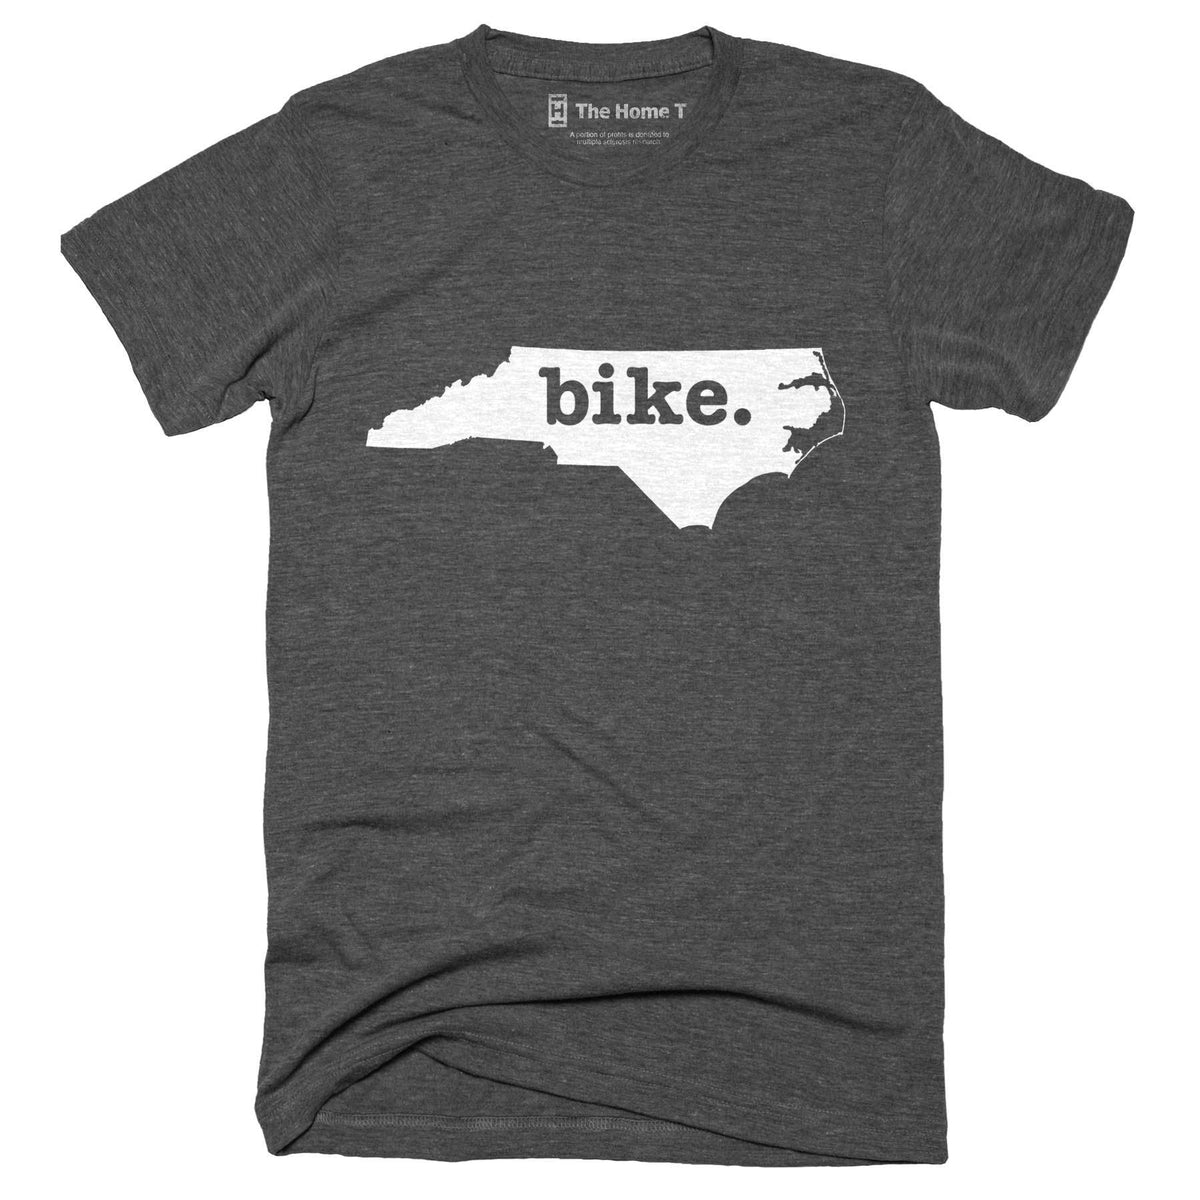 North Carolina Bike Home T-Shirt Outdoor Collection The Home T XS Grey